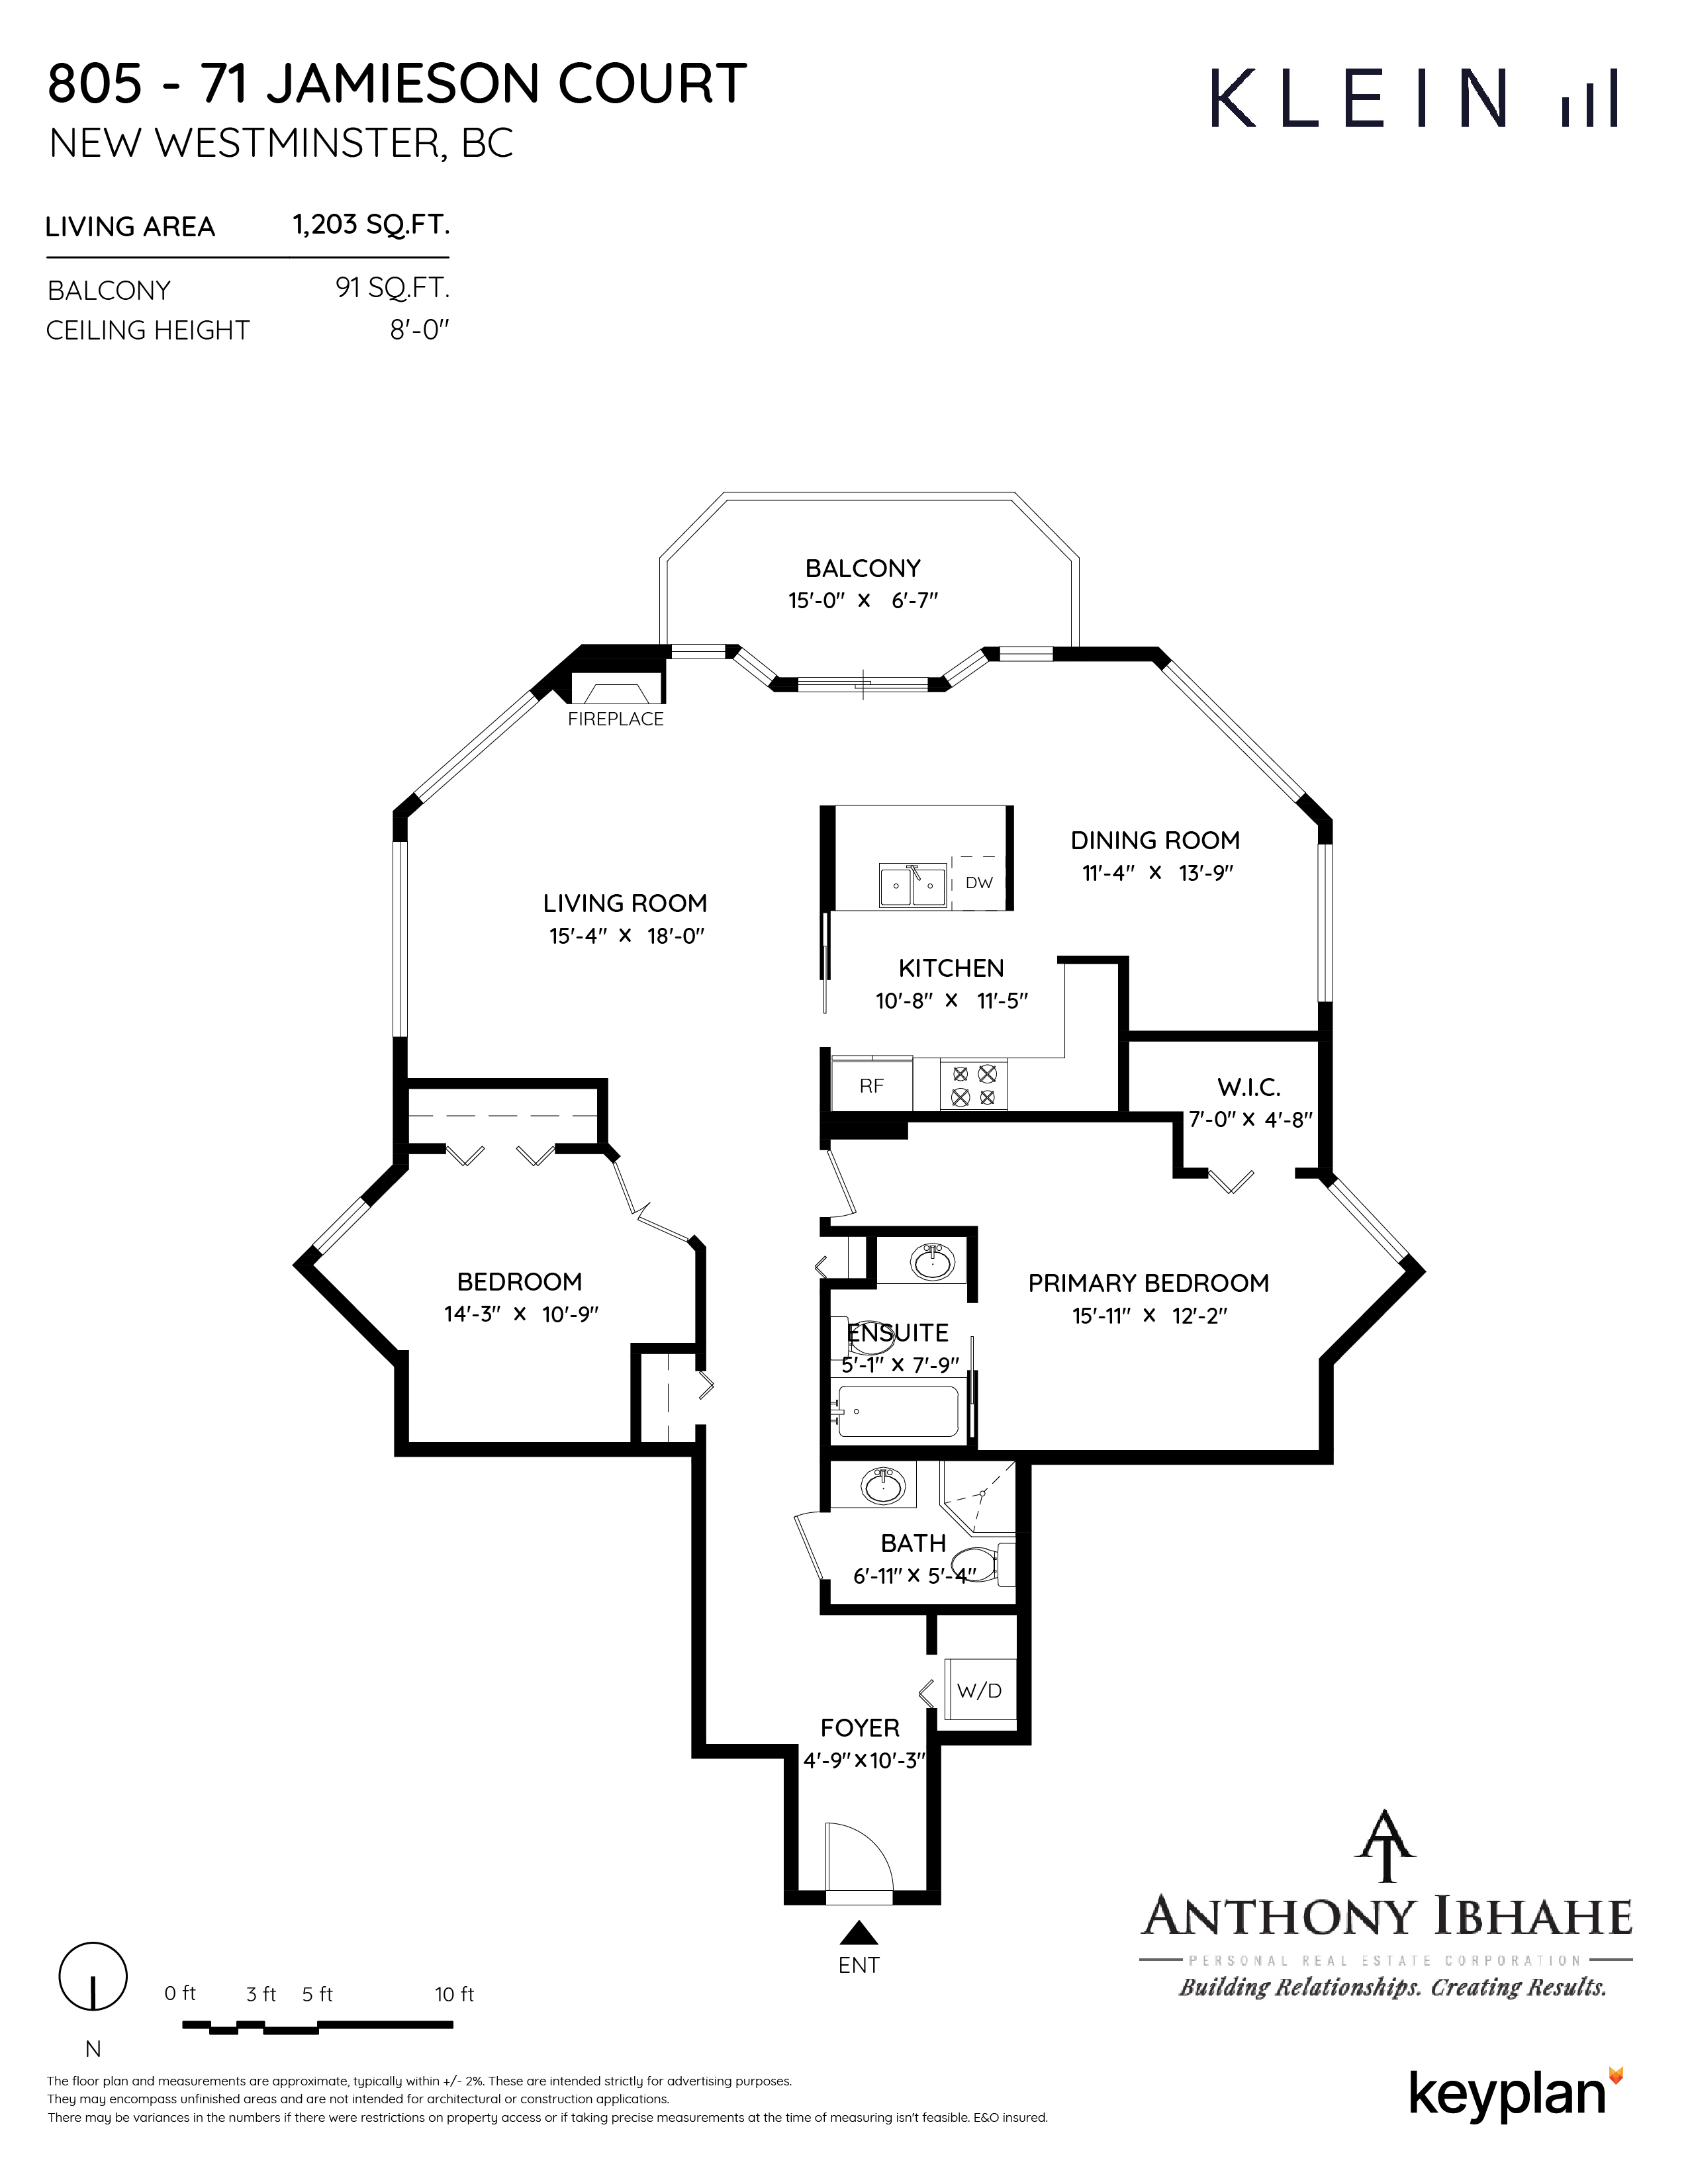 Anthony Ibhahe - Unit 805 - 71 Jamieson Court, New Westminster, BC, Canada | Floor Plan 1